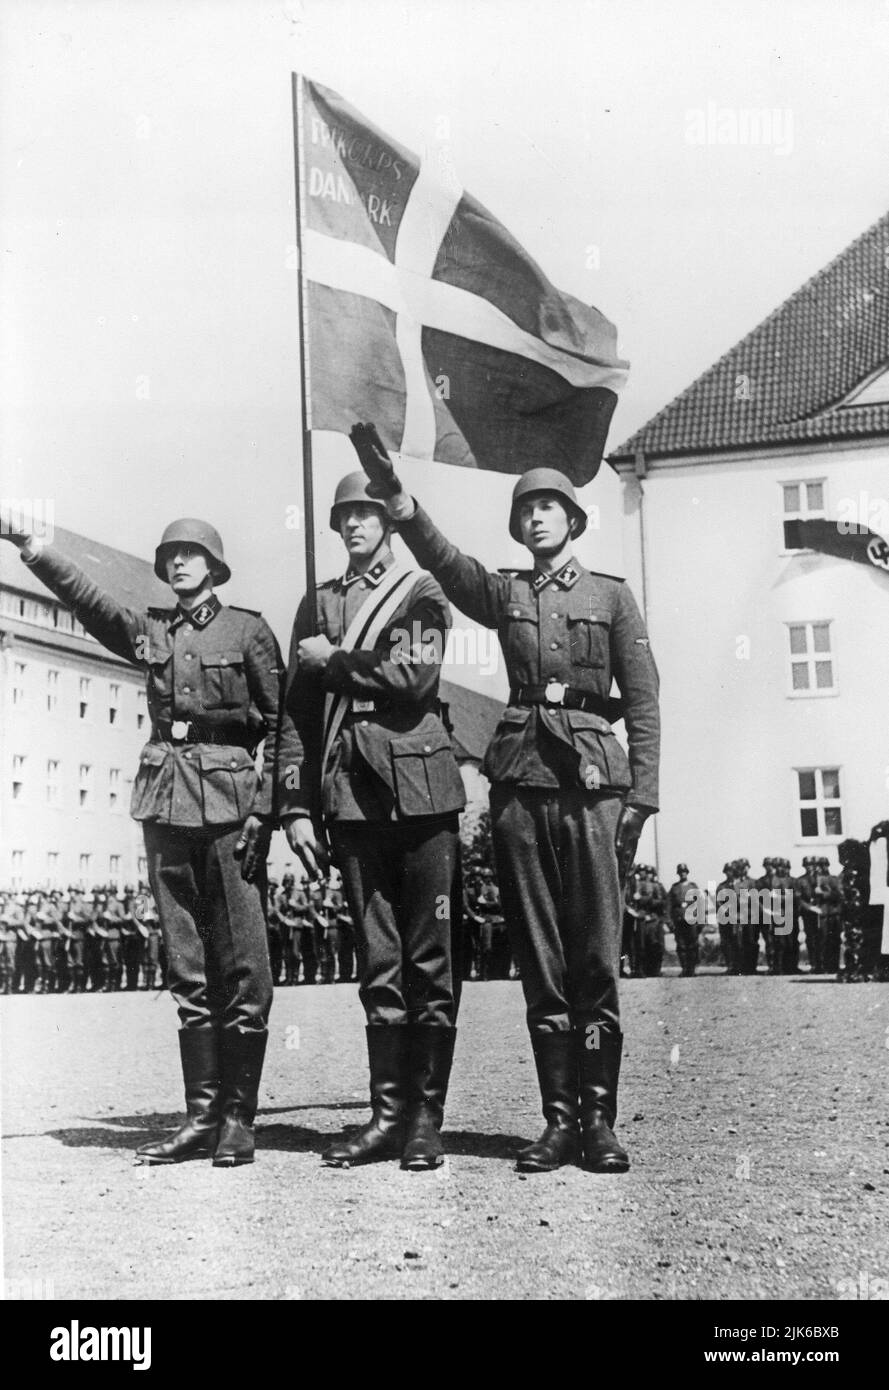 The Nazi German elite troops the Waffen-SS had many divisions of foreign volunteers who believed in nazism. Here members of Free Corps Denmark taking an oath, July 1941 Stock Photo